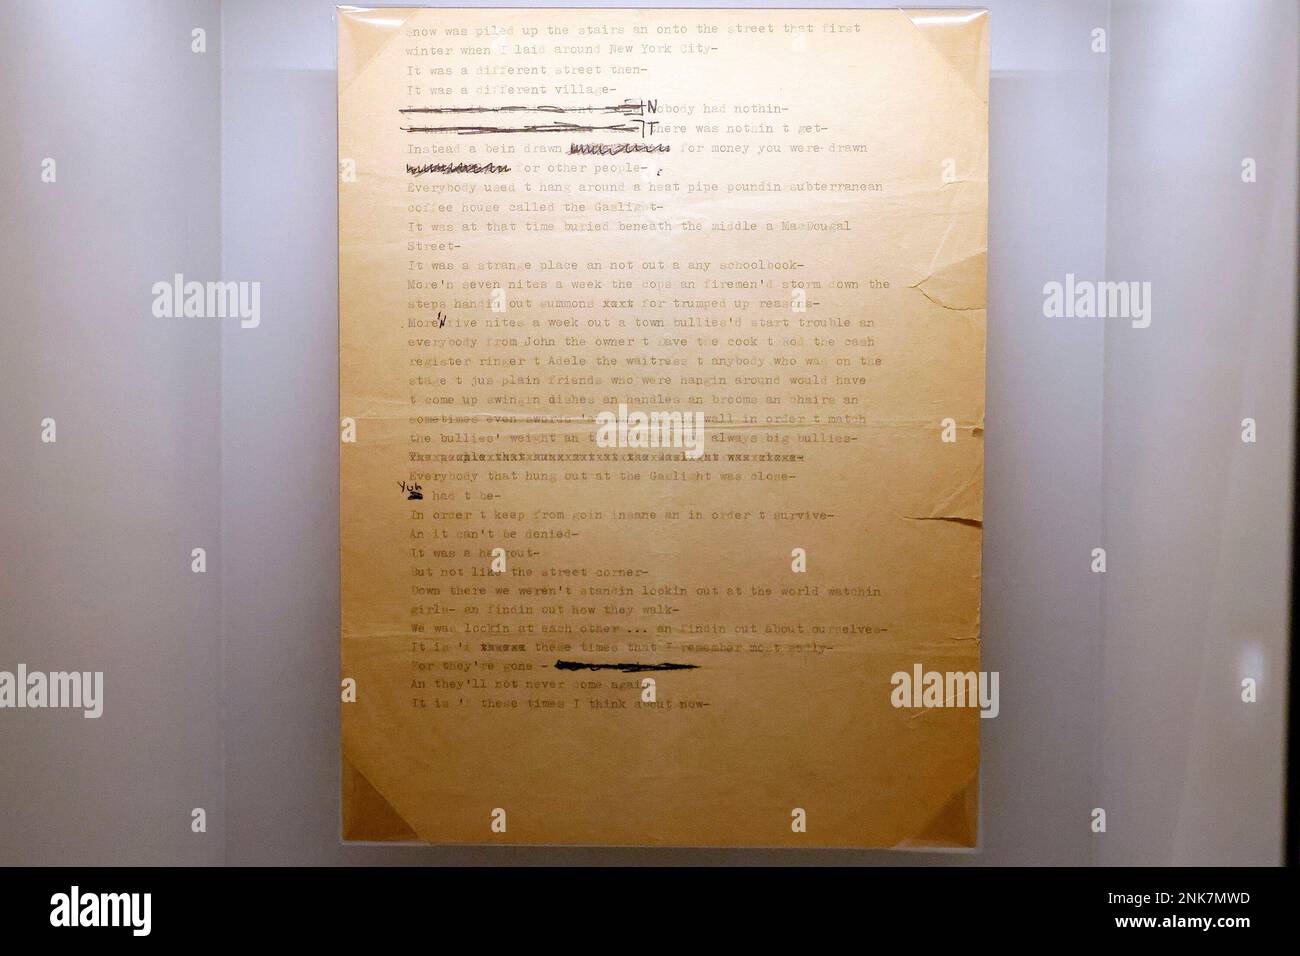 Bob Dylan's liner notes for the "Peter, Paul and Mary" album "In the Wind"  on display at the Bob Dylan Center Tuesday, May 10, 2022, in Tulsa, Okla.  (Mike Simons/Tulsa World via